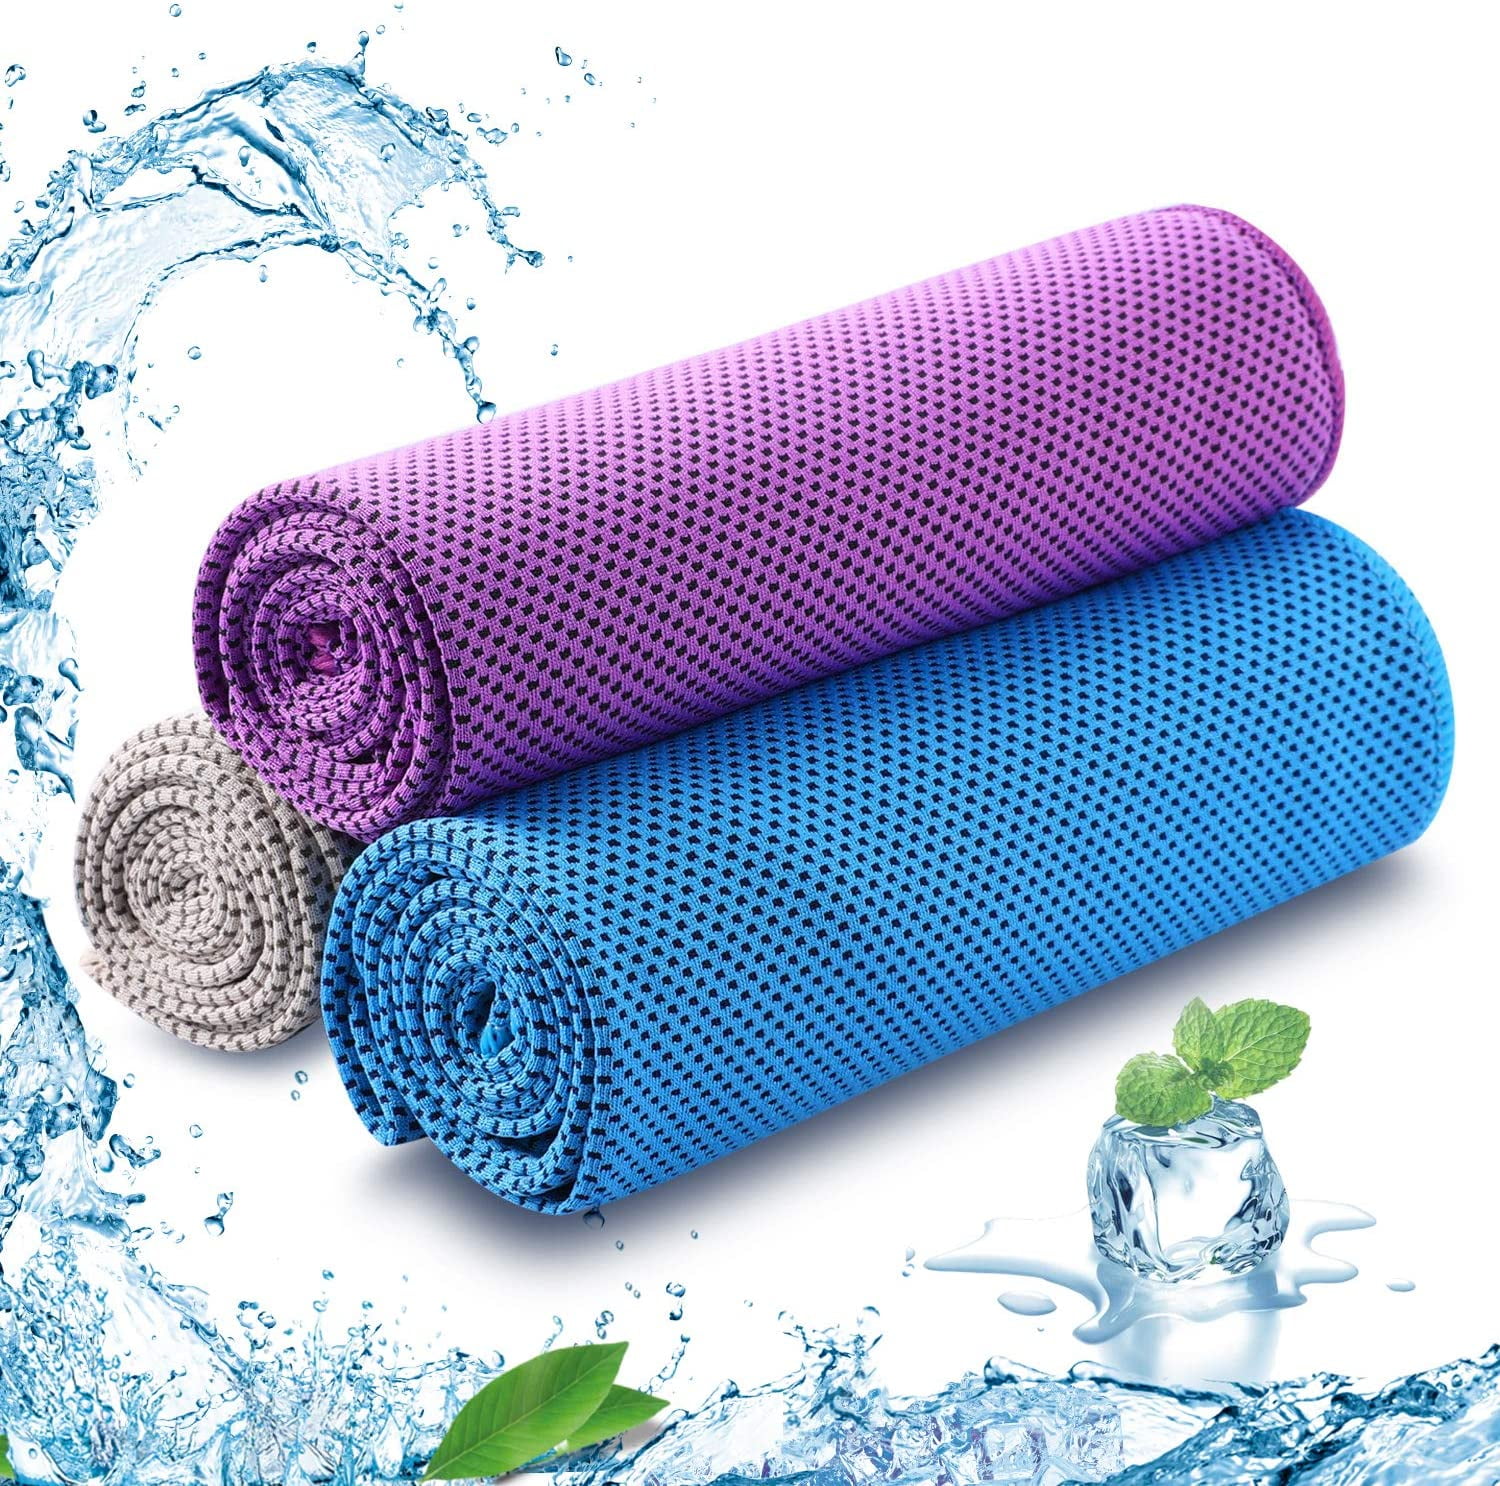 Instant Ice Cooling Towel for Gym Cycling Jogging Sunstroke Outdoor Sports Cloth 